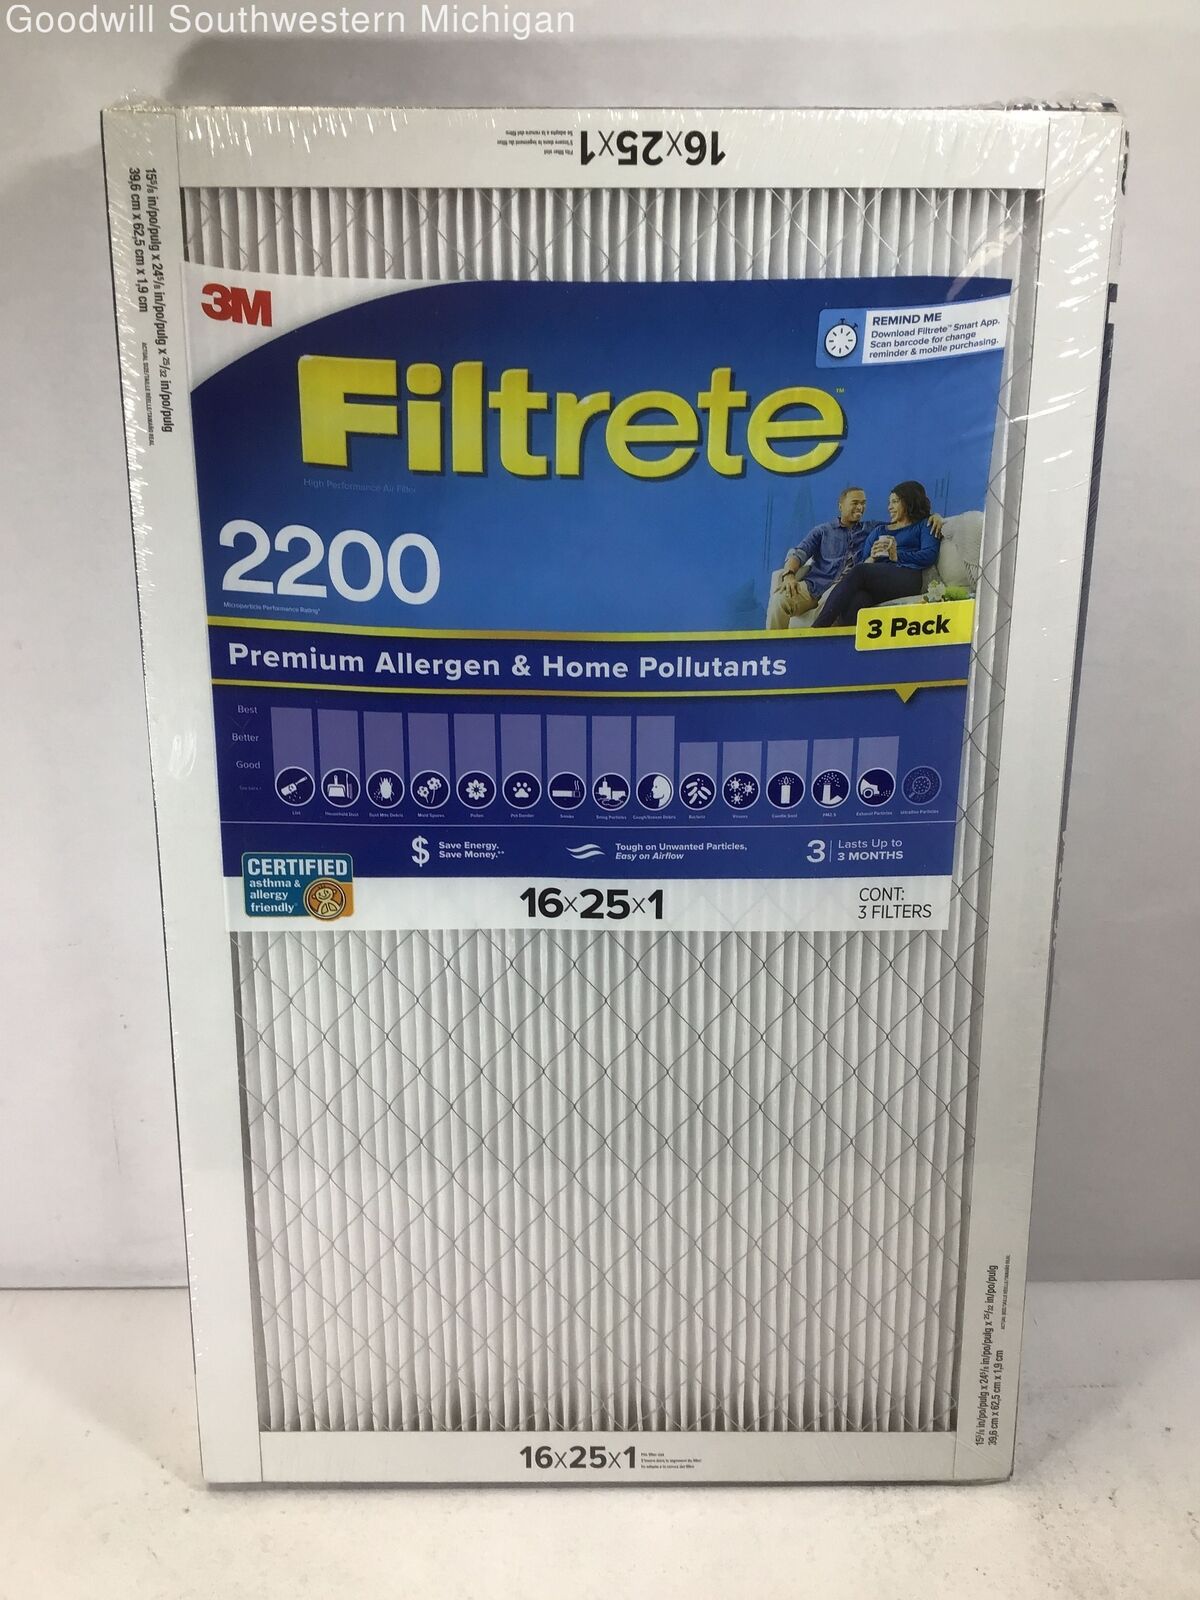 3M Filtrete 2200 Premium Allergen Filters 16x25x1 Pack of 3 NEW, Sealed *CREASES